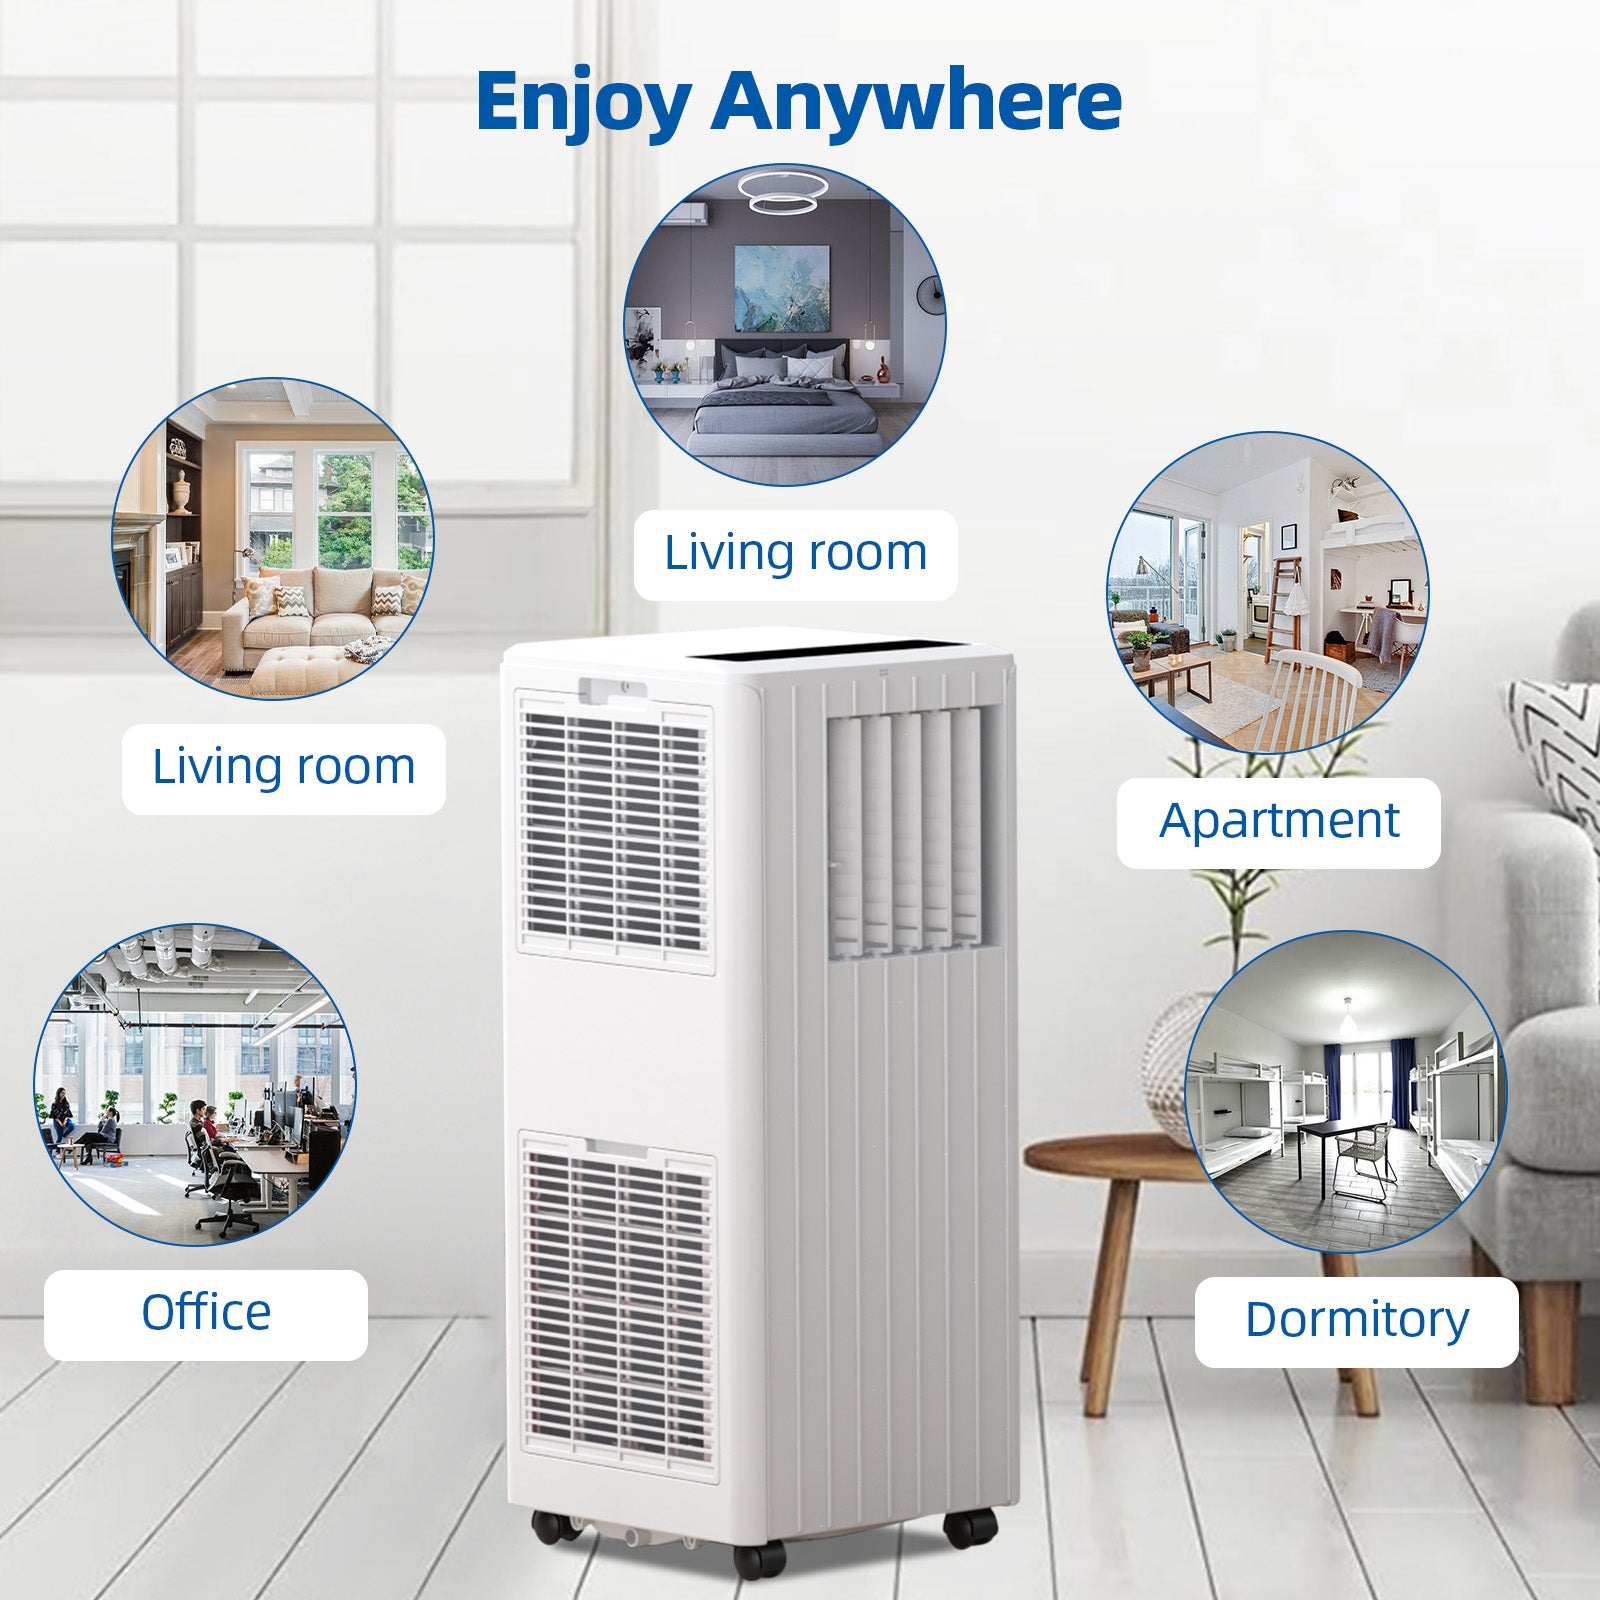 GARVEE 8000 BTU Portable Air Conditioner 3-in-1 Portable Conditioner with Remote Control 2 Speeds Cools Room Up to 350 Sq.Ft - White